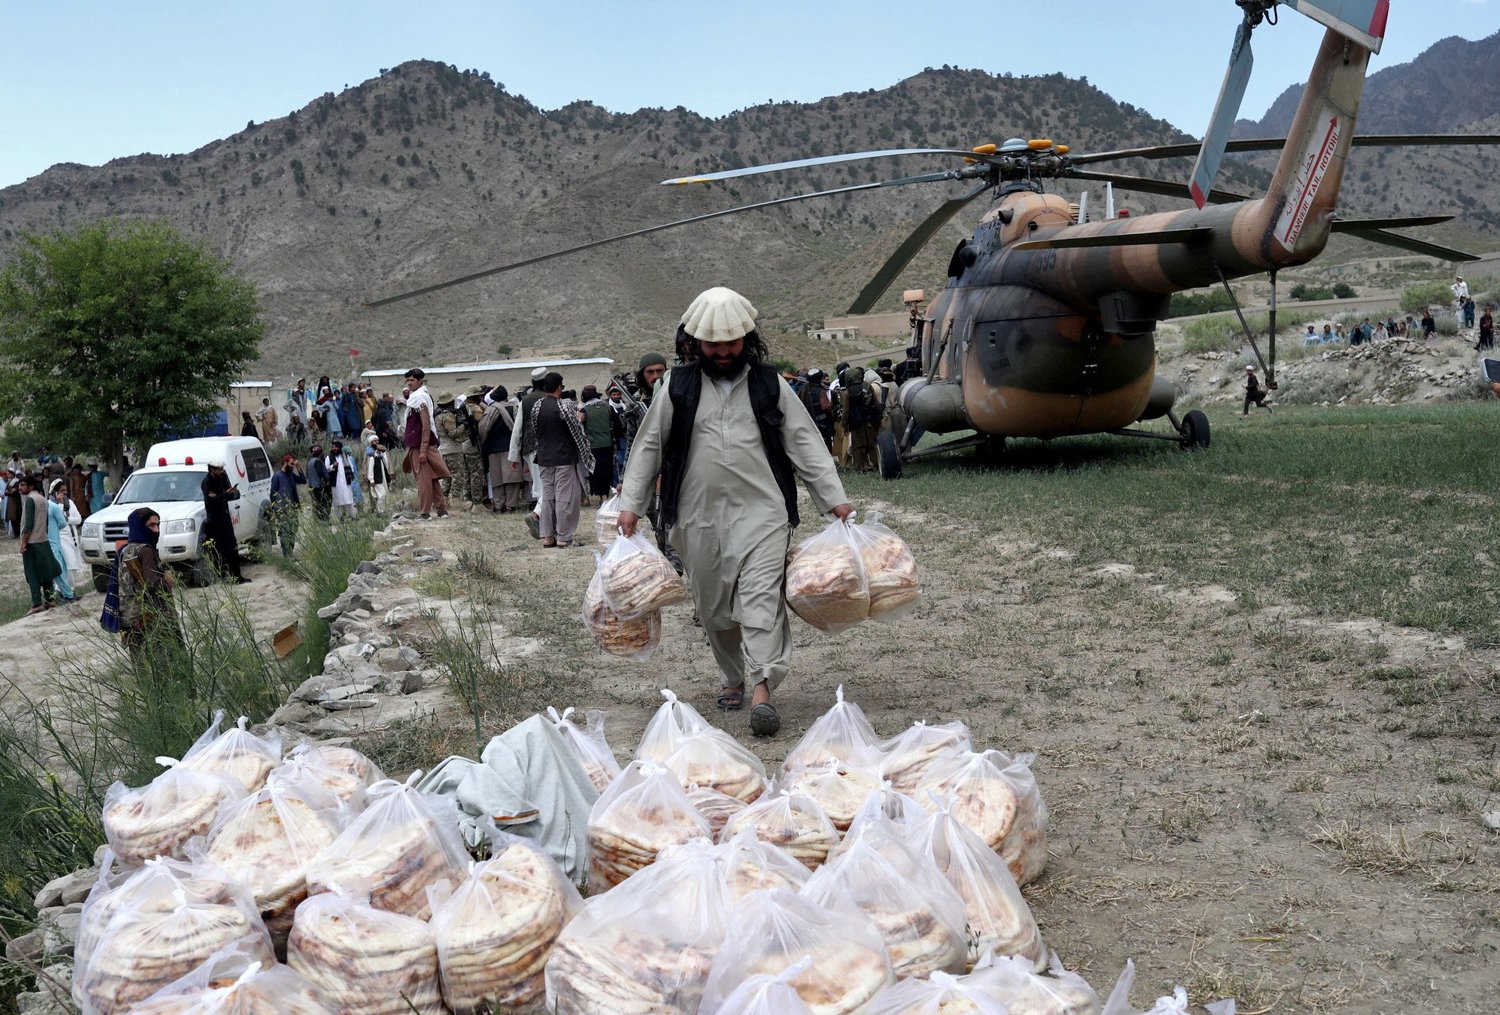 An Afghan man carries bags of bread that were transported by a Taliban helicopter June 23 to the site of a magnitude 6 earthquake the previous day in Gayan.